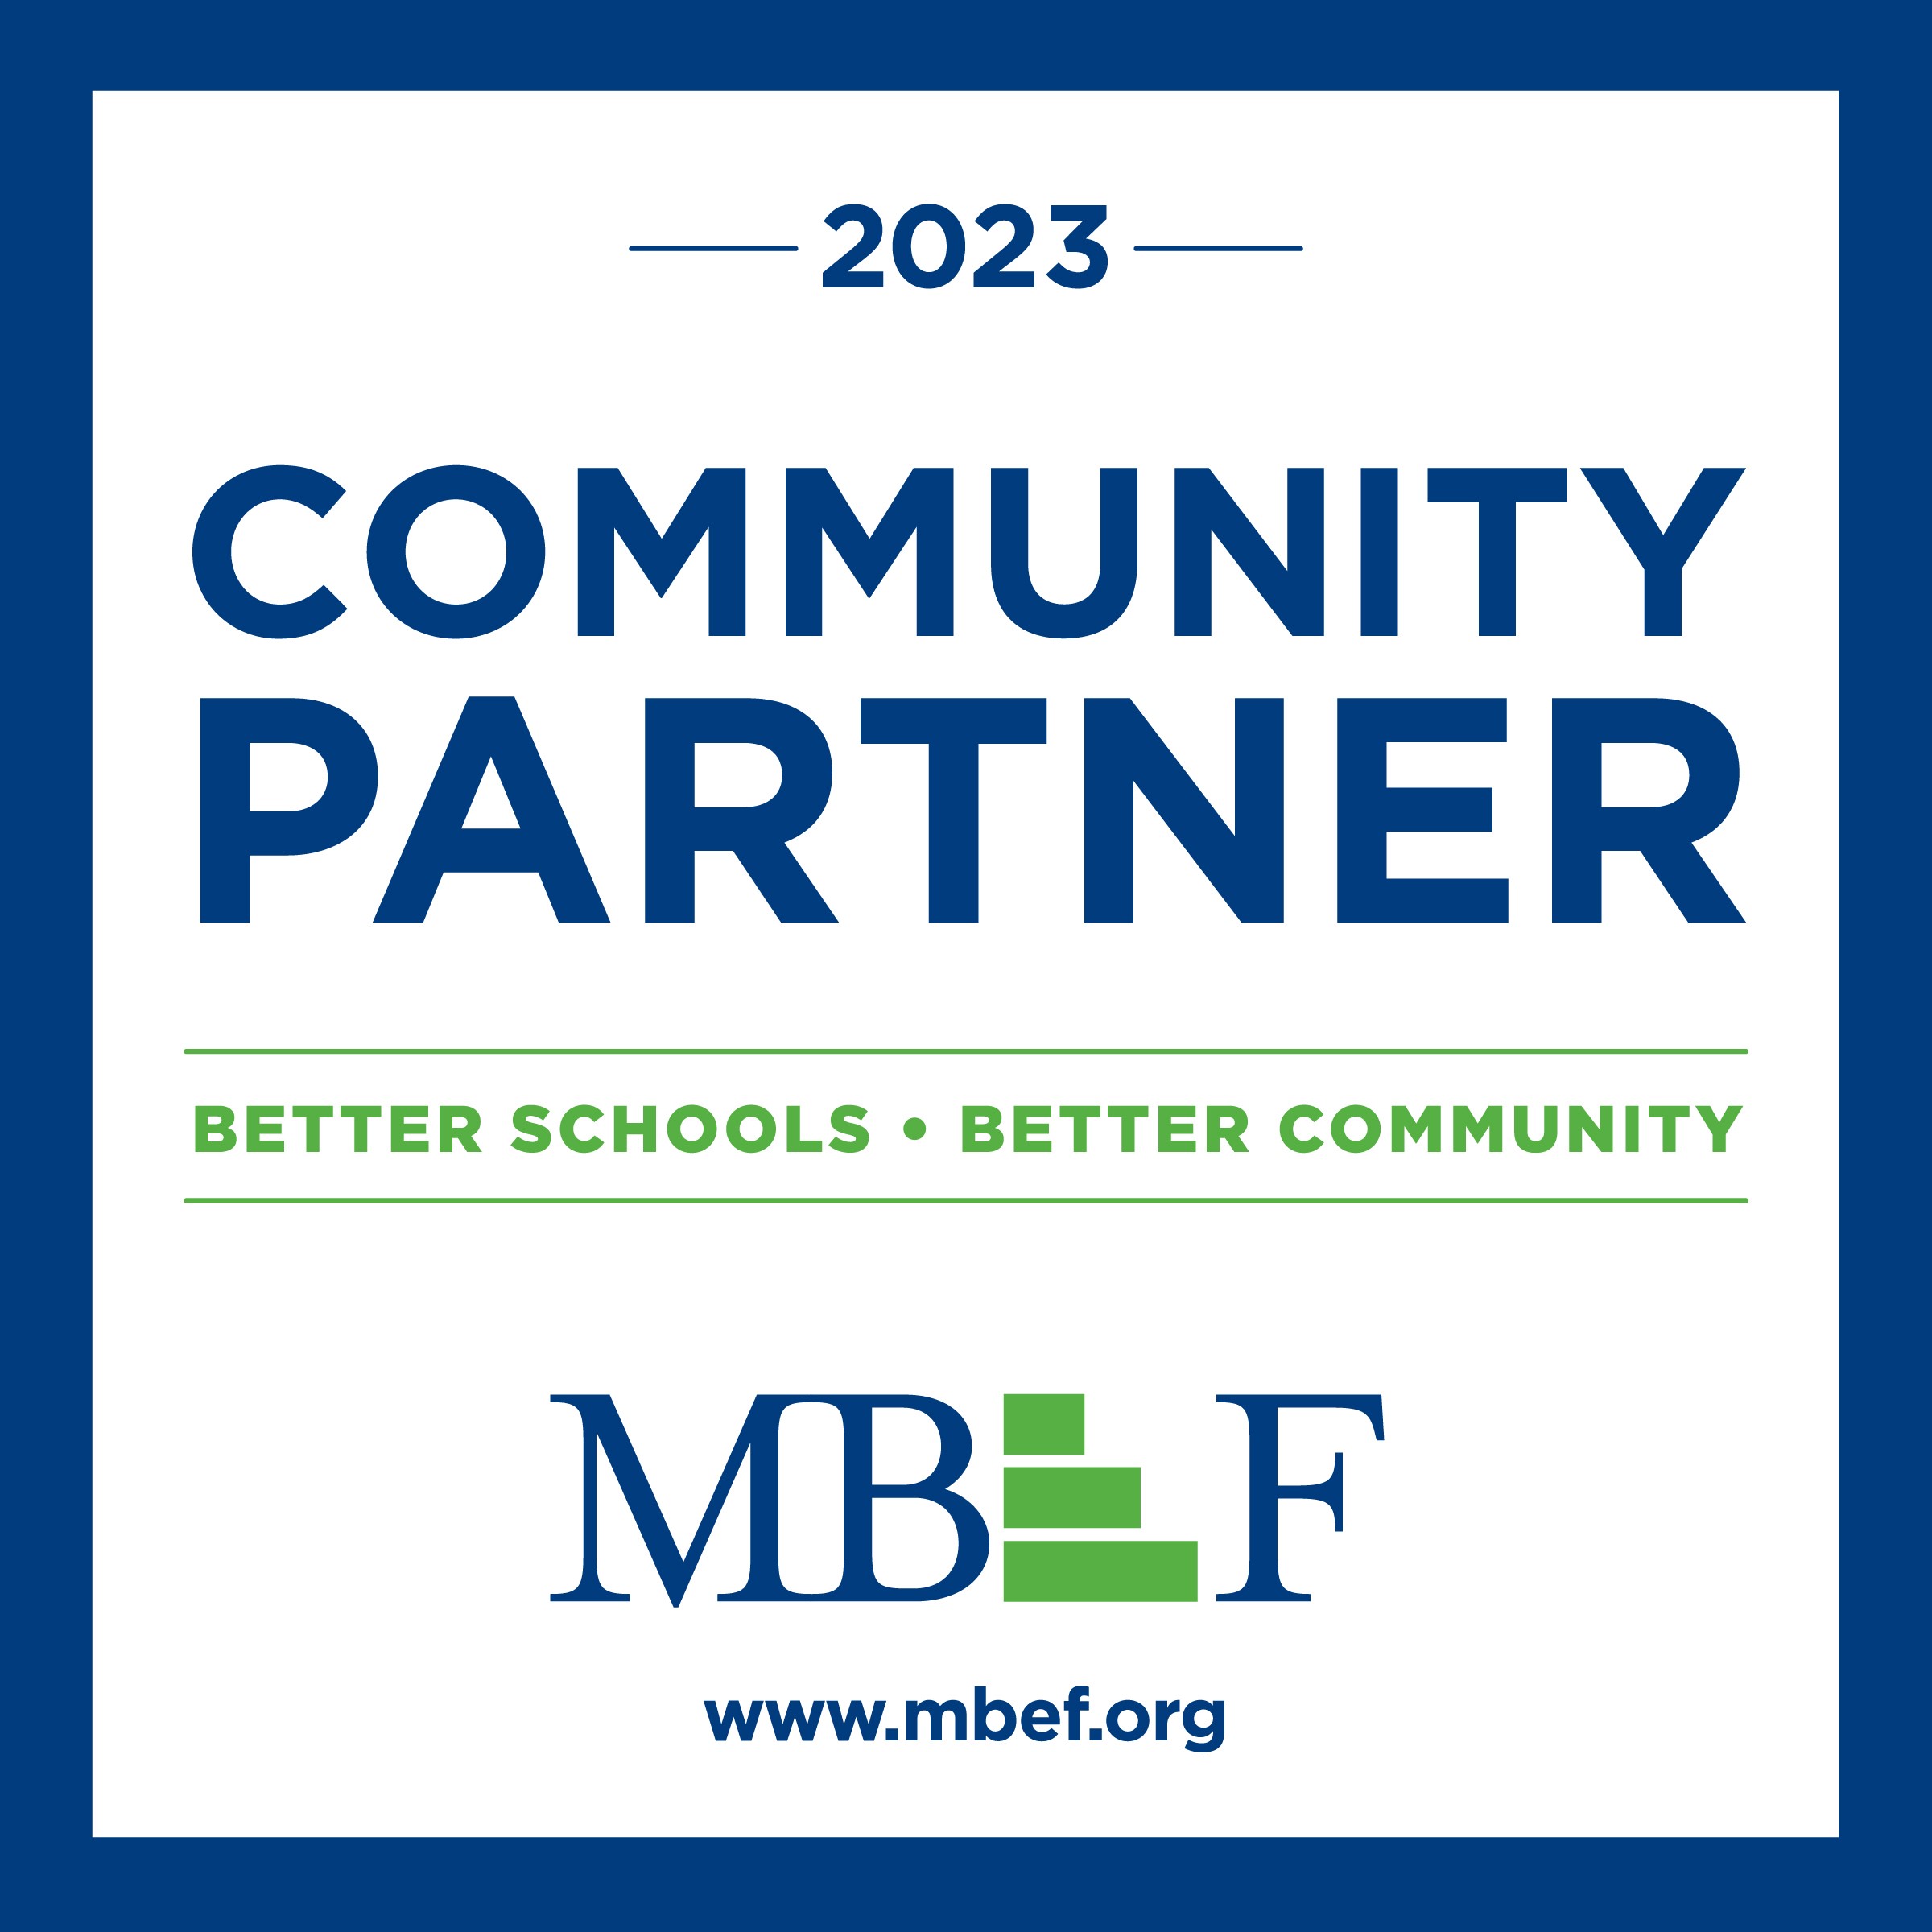 The logo of MBF, promoting better schools and community.